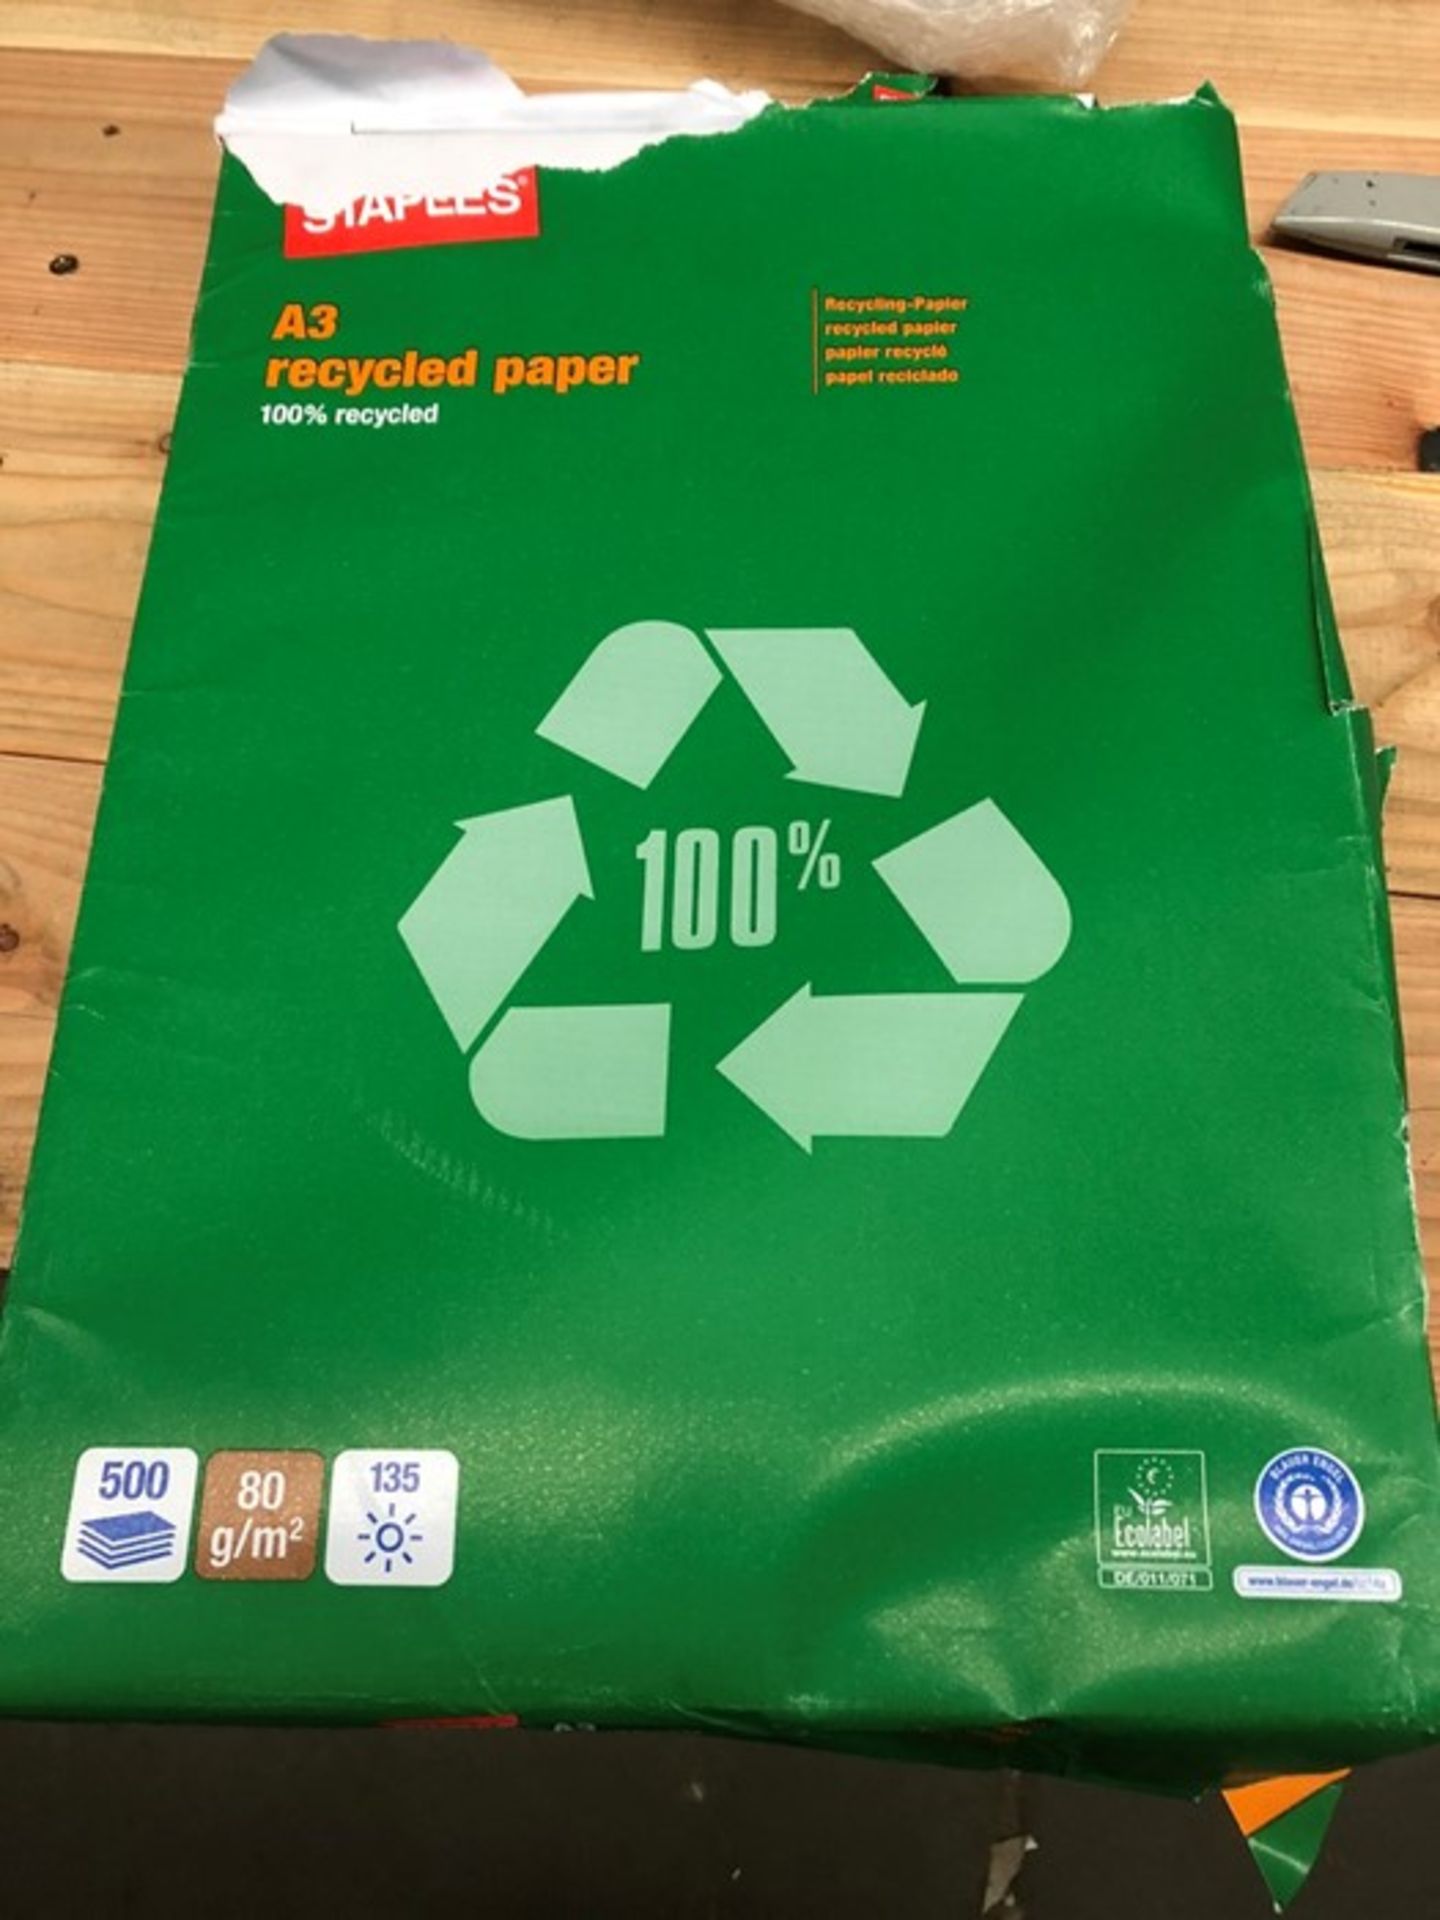 1 BAGGED SET OF 500 SHEETS OF STAPLES A3 RECYCLED PAPER IN WHITE / PN - 880 (PUBLIC VIEWING